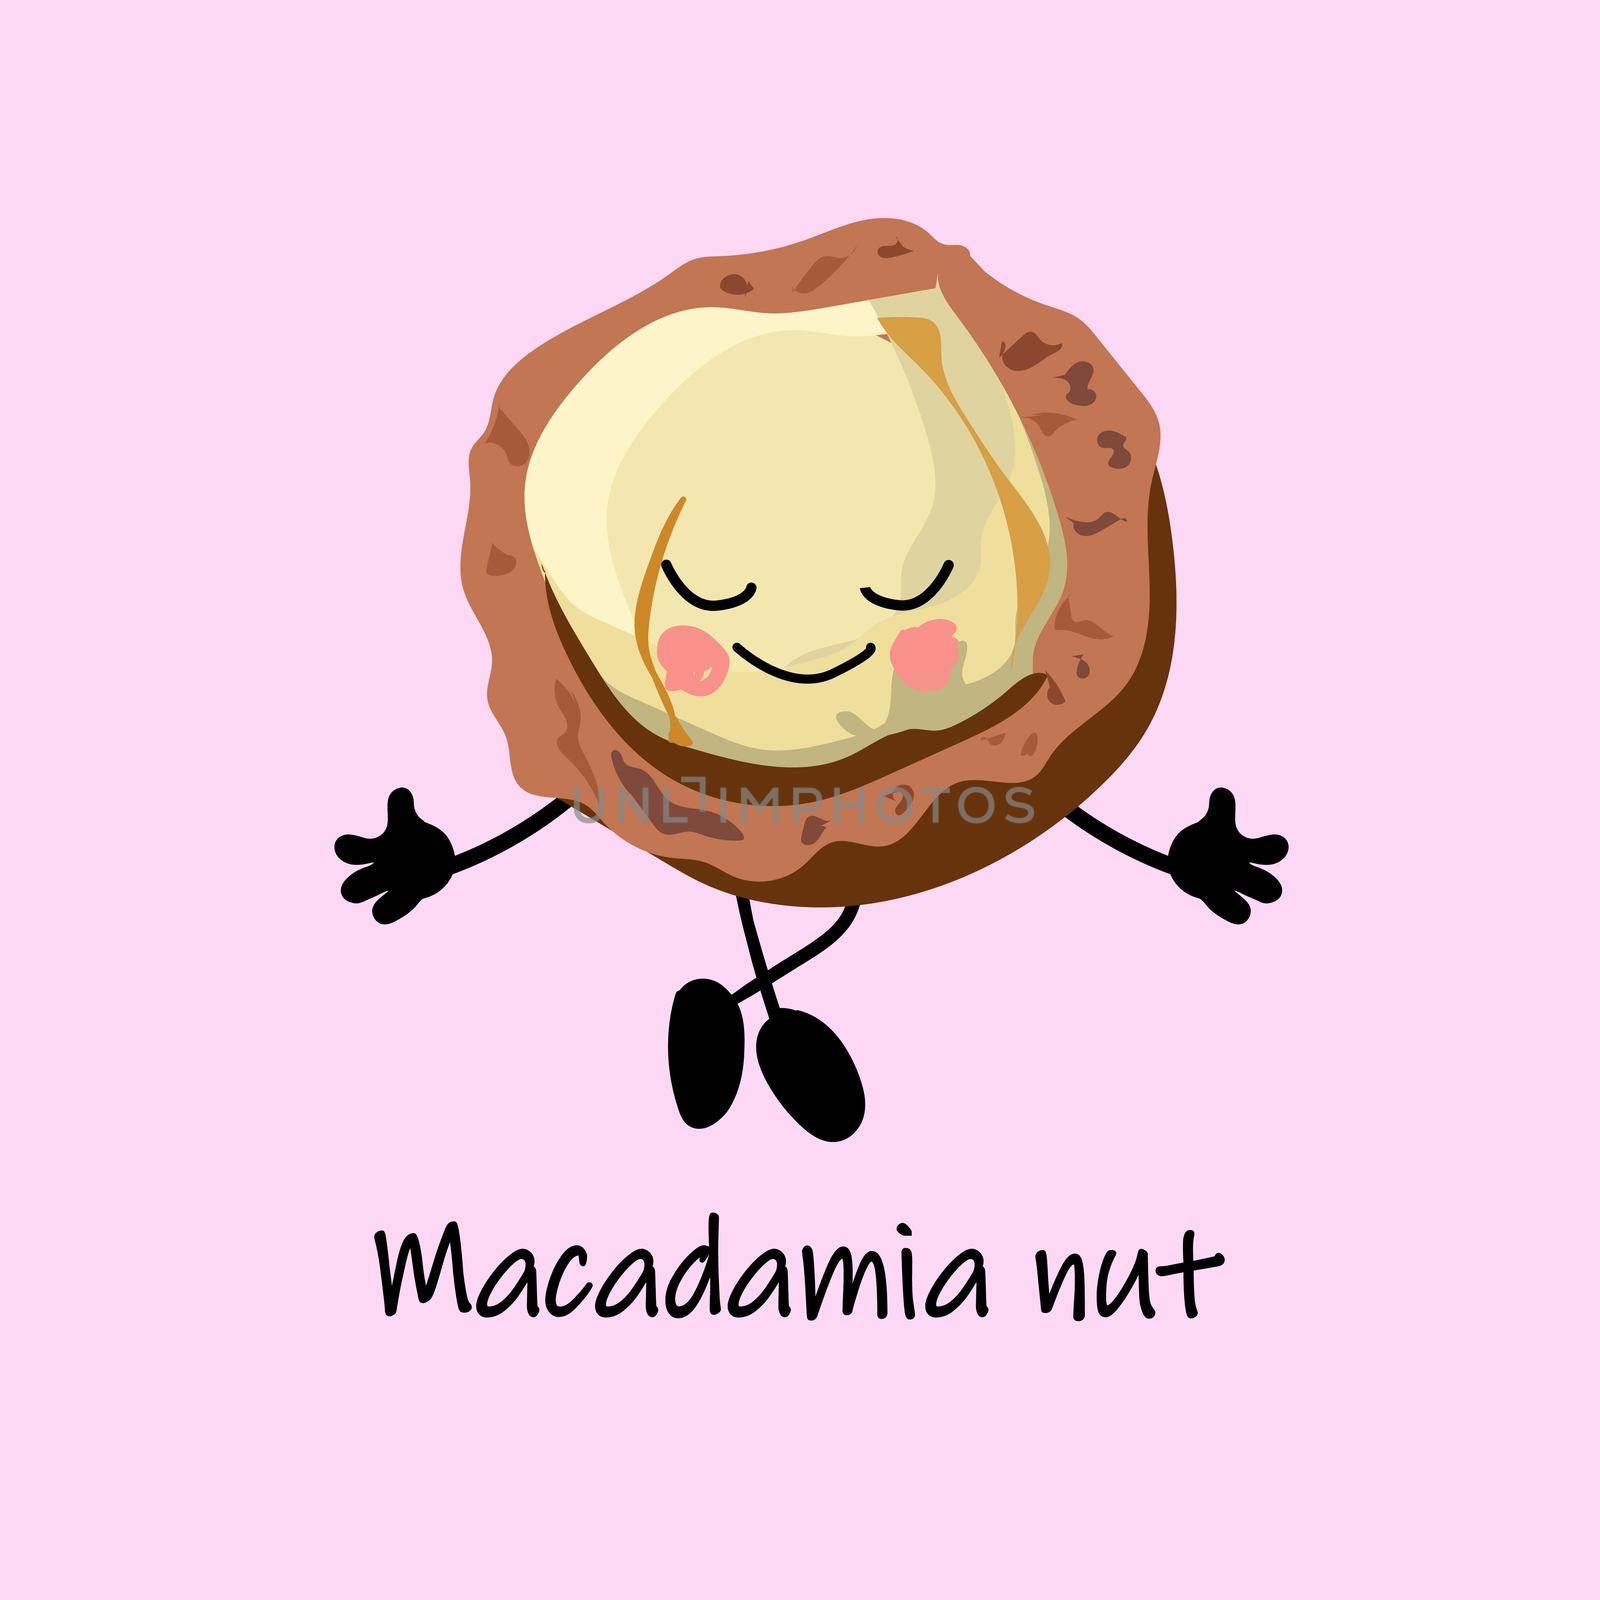 collection of nuts characters. Healthy foods. Vegetarianism and healthy food. Macadamia nut cartoon character.